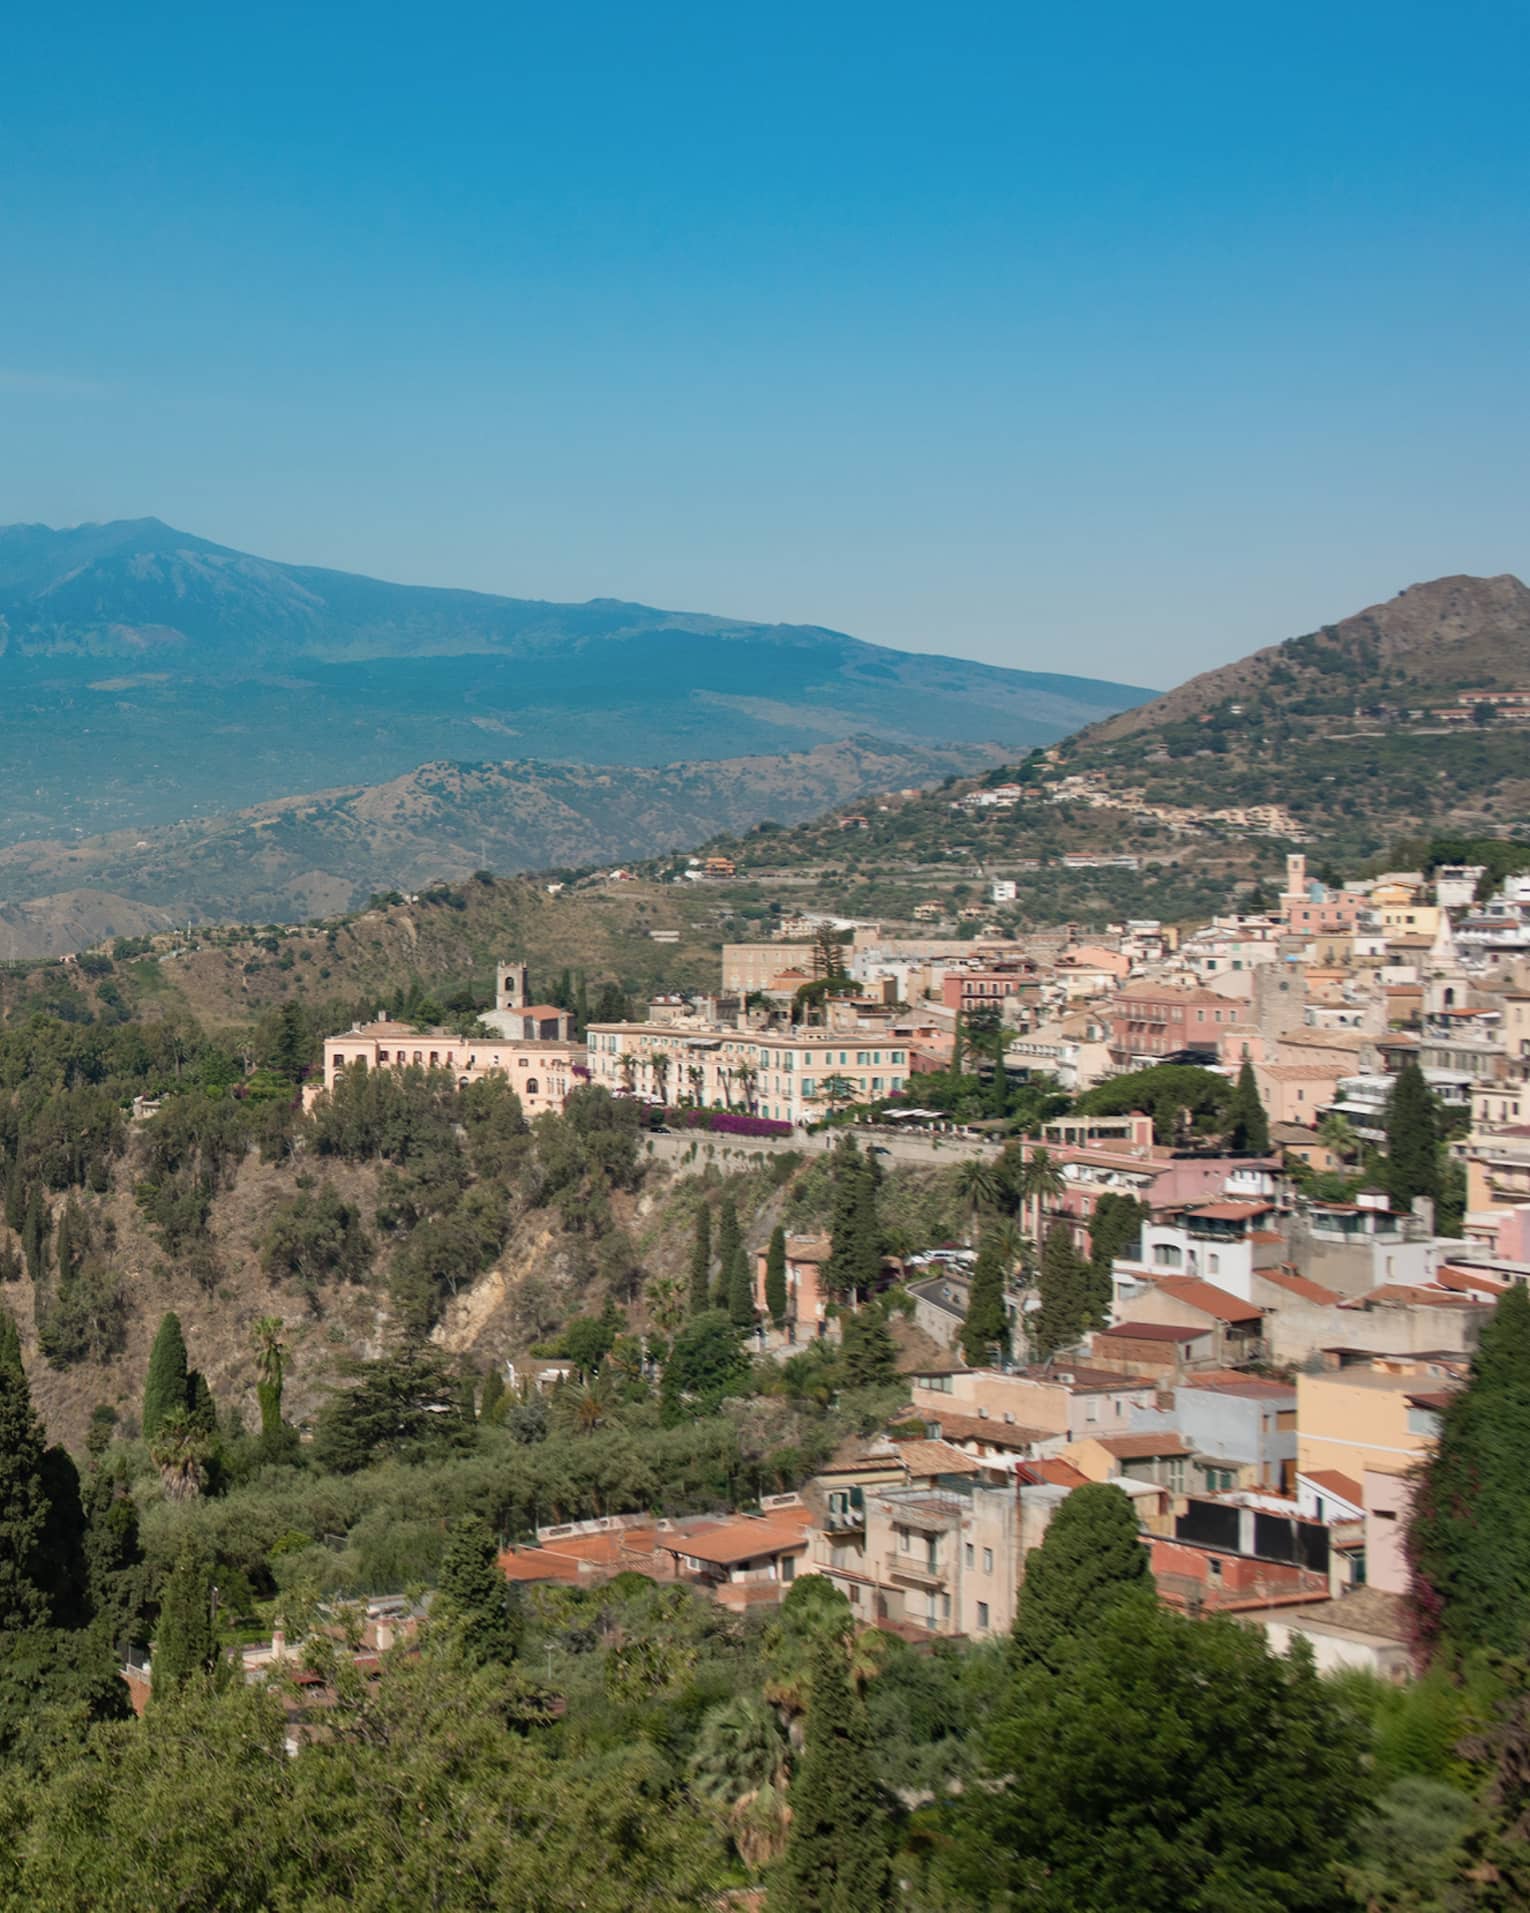 View of Taormina town on hillside, overlooking the sea